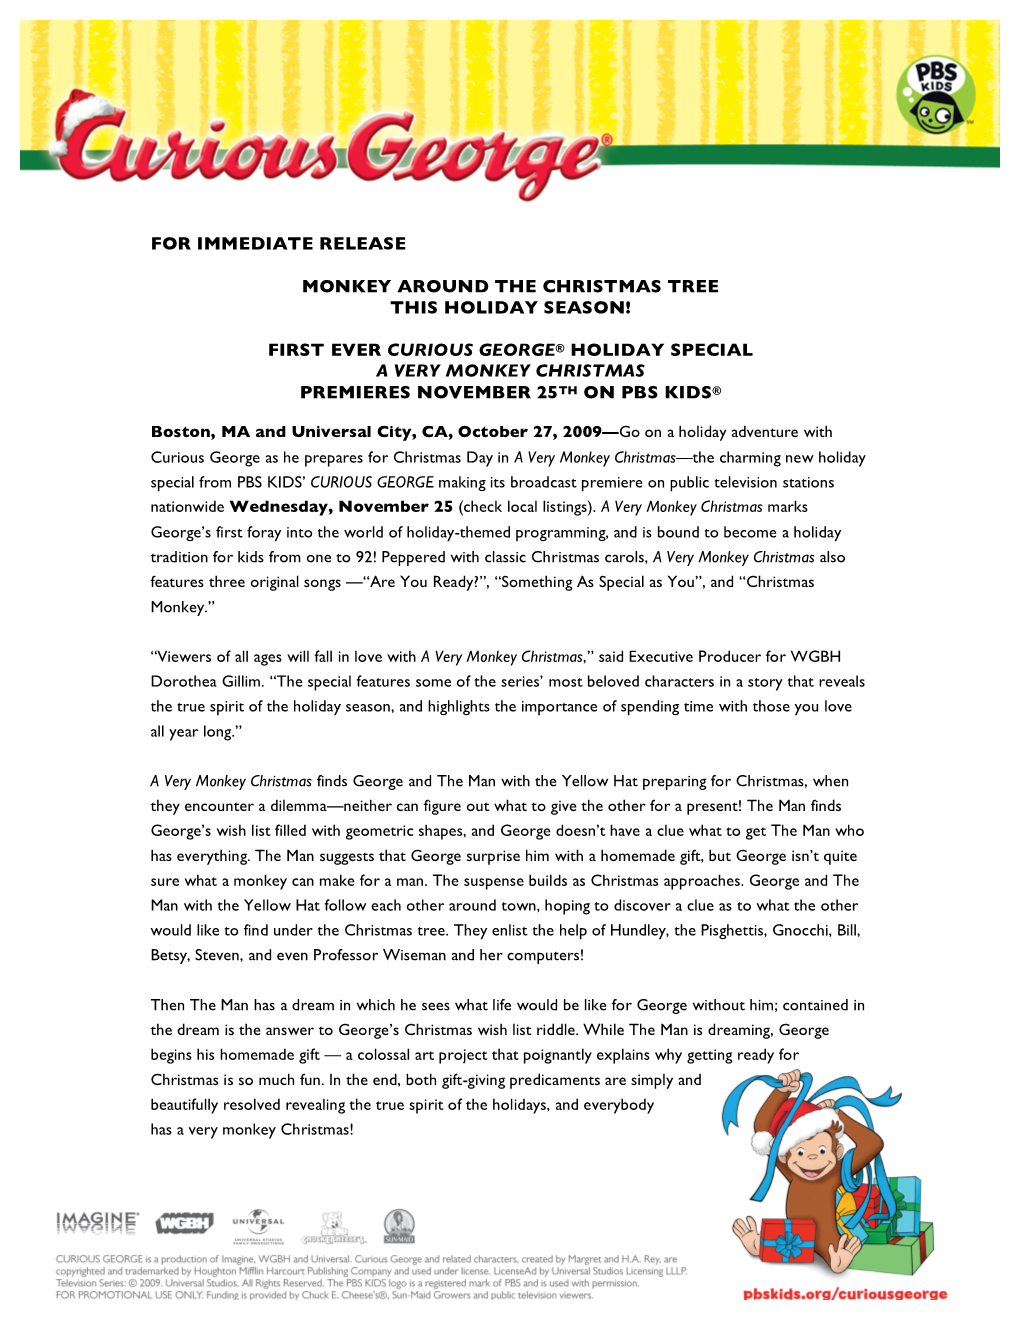 First Ever Curious George® Holiday Special a Very Monkey Christmas Premieres November 25Th on Pbs Kids®